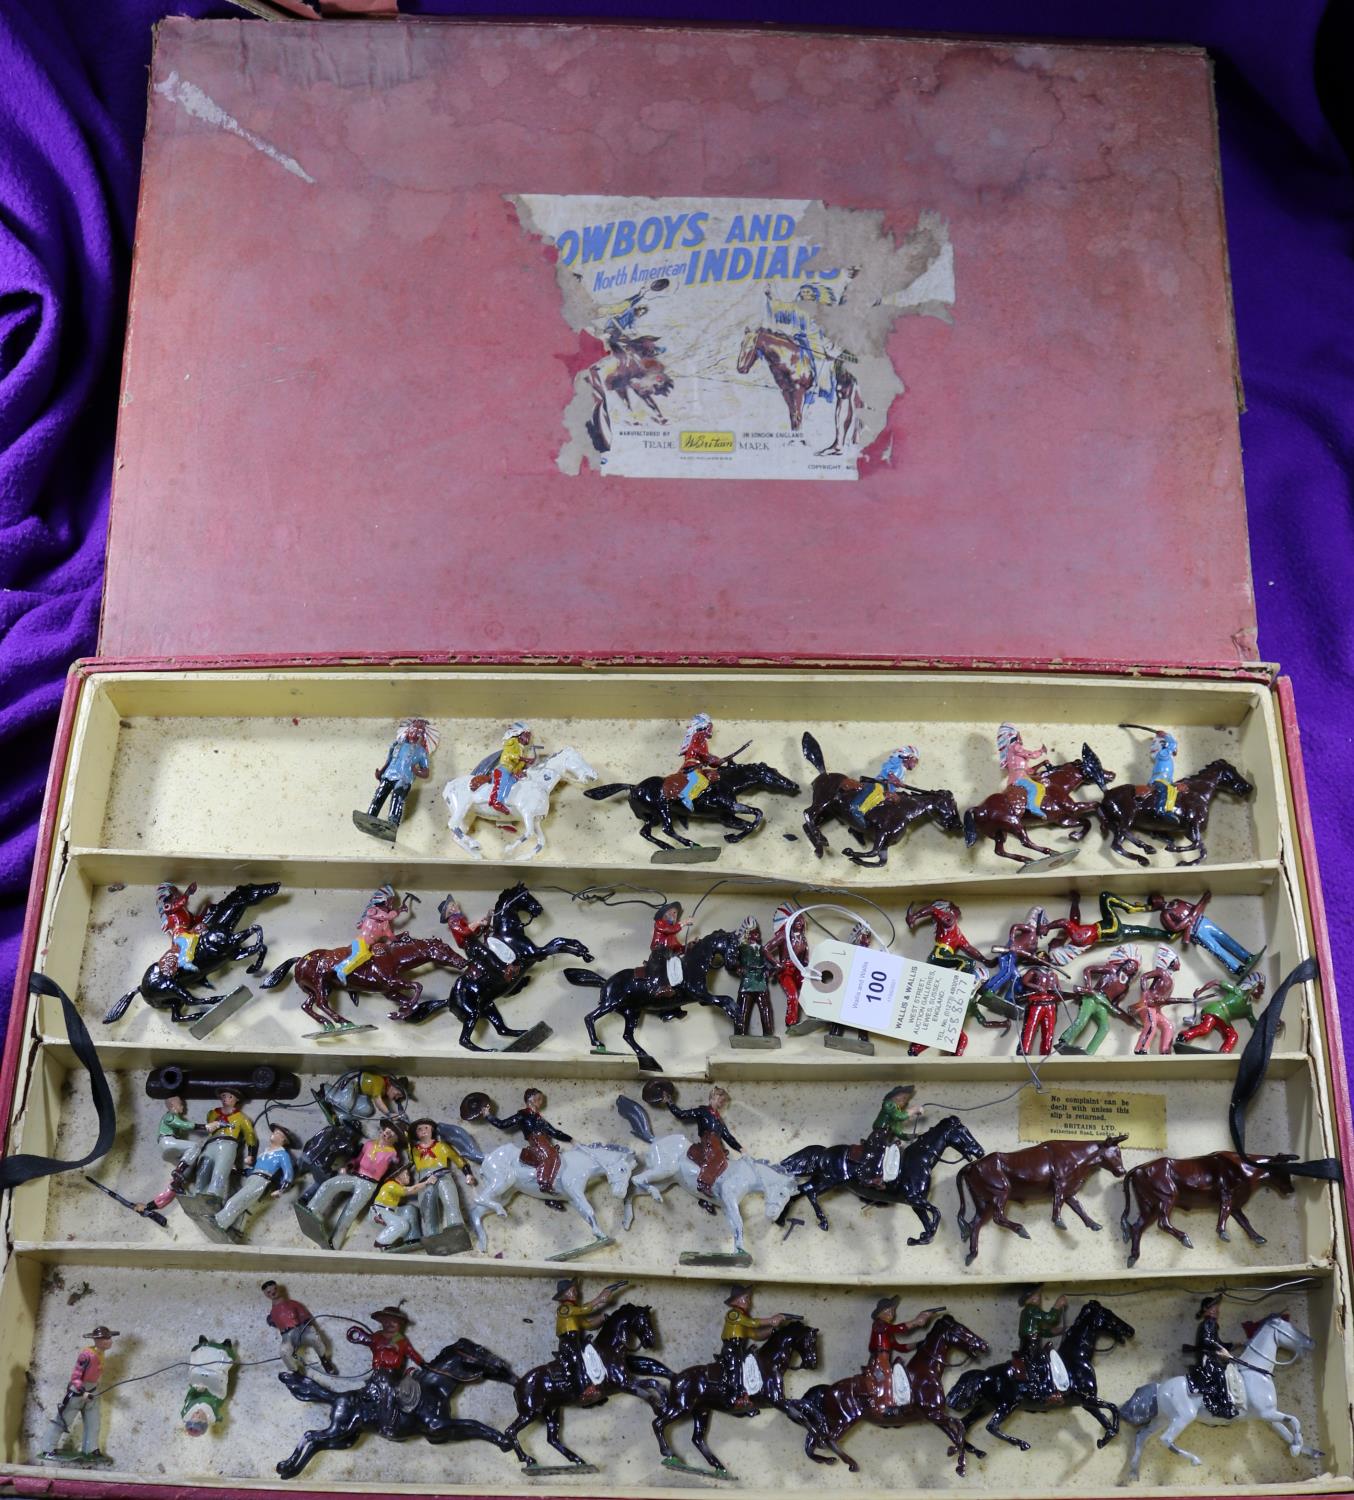 Britains North American Cowboys & Indians 2-Tier Set 2061. Comprising part of the contents of this